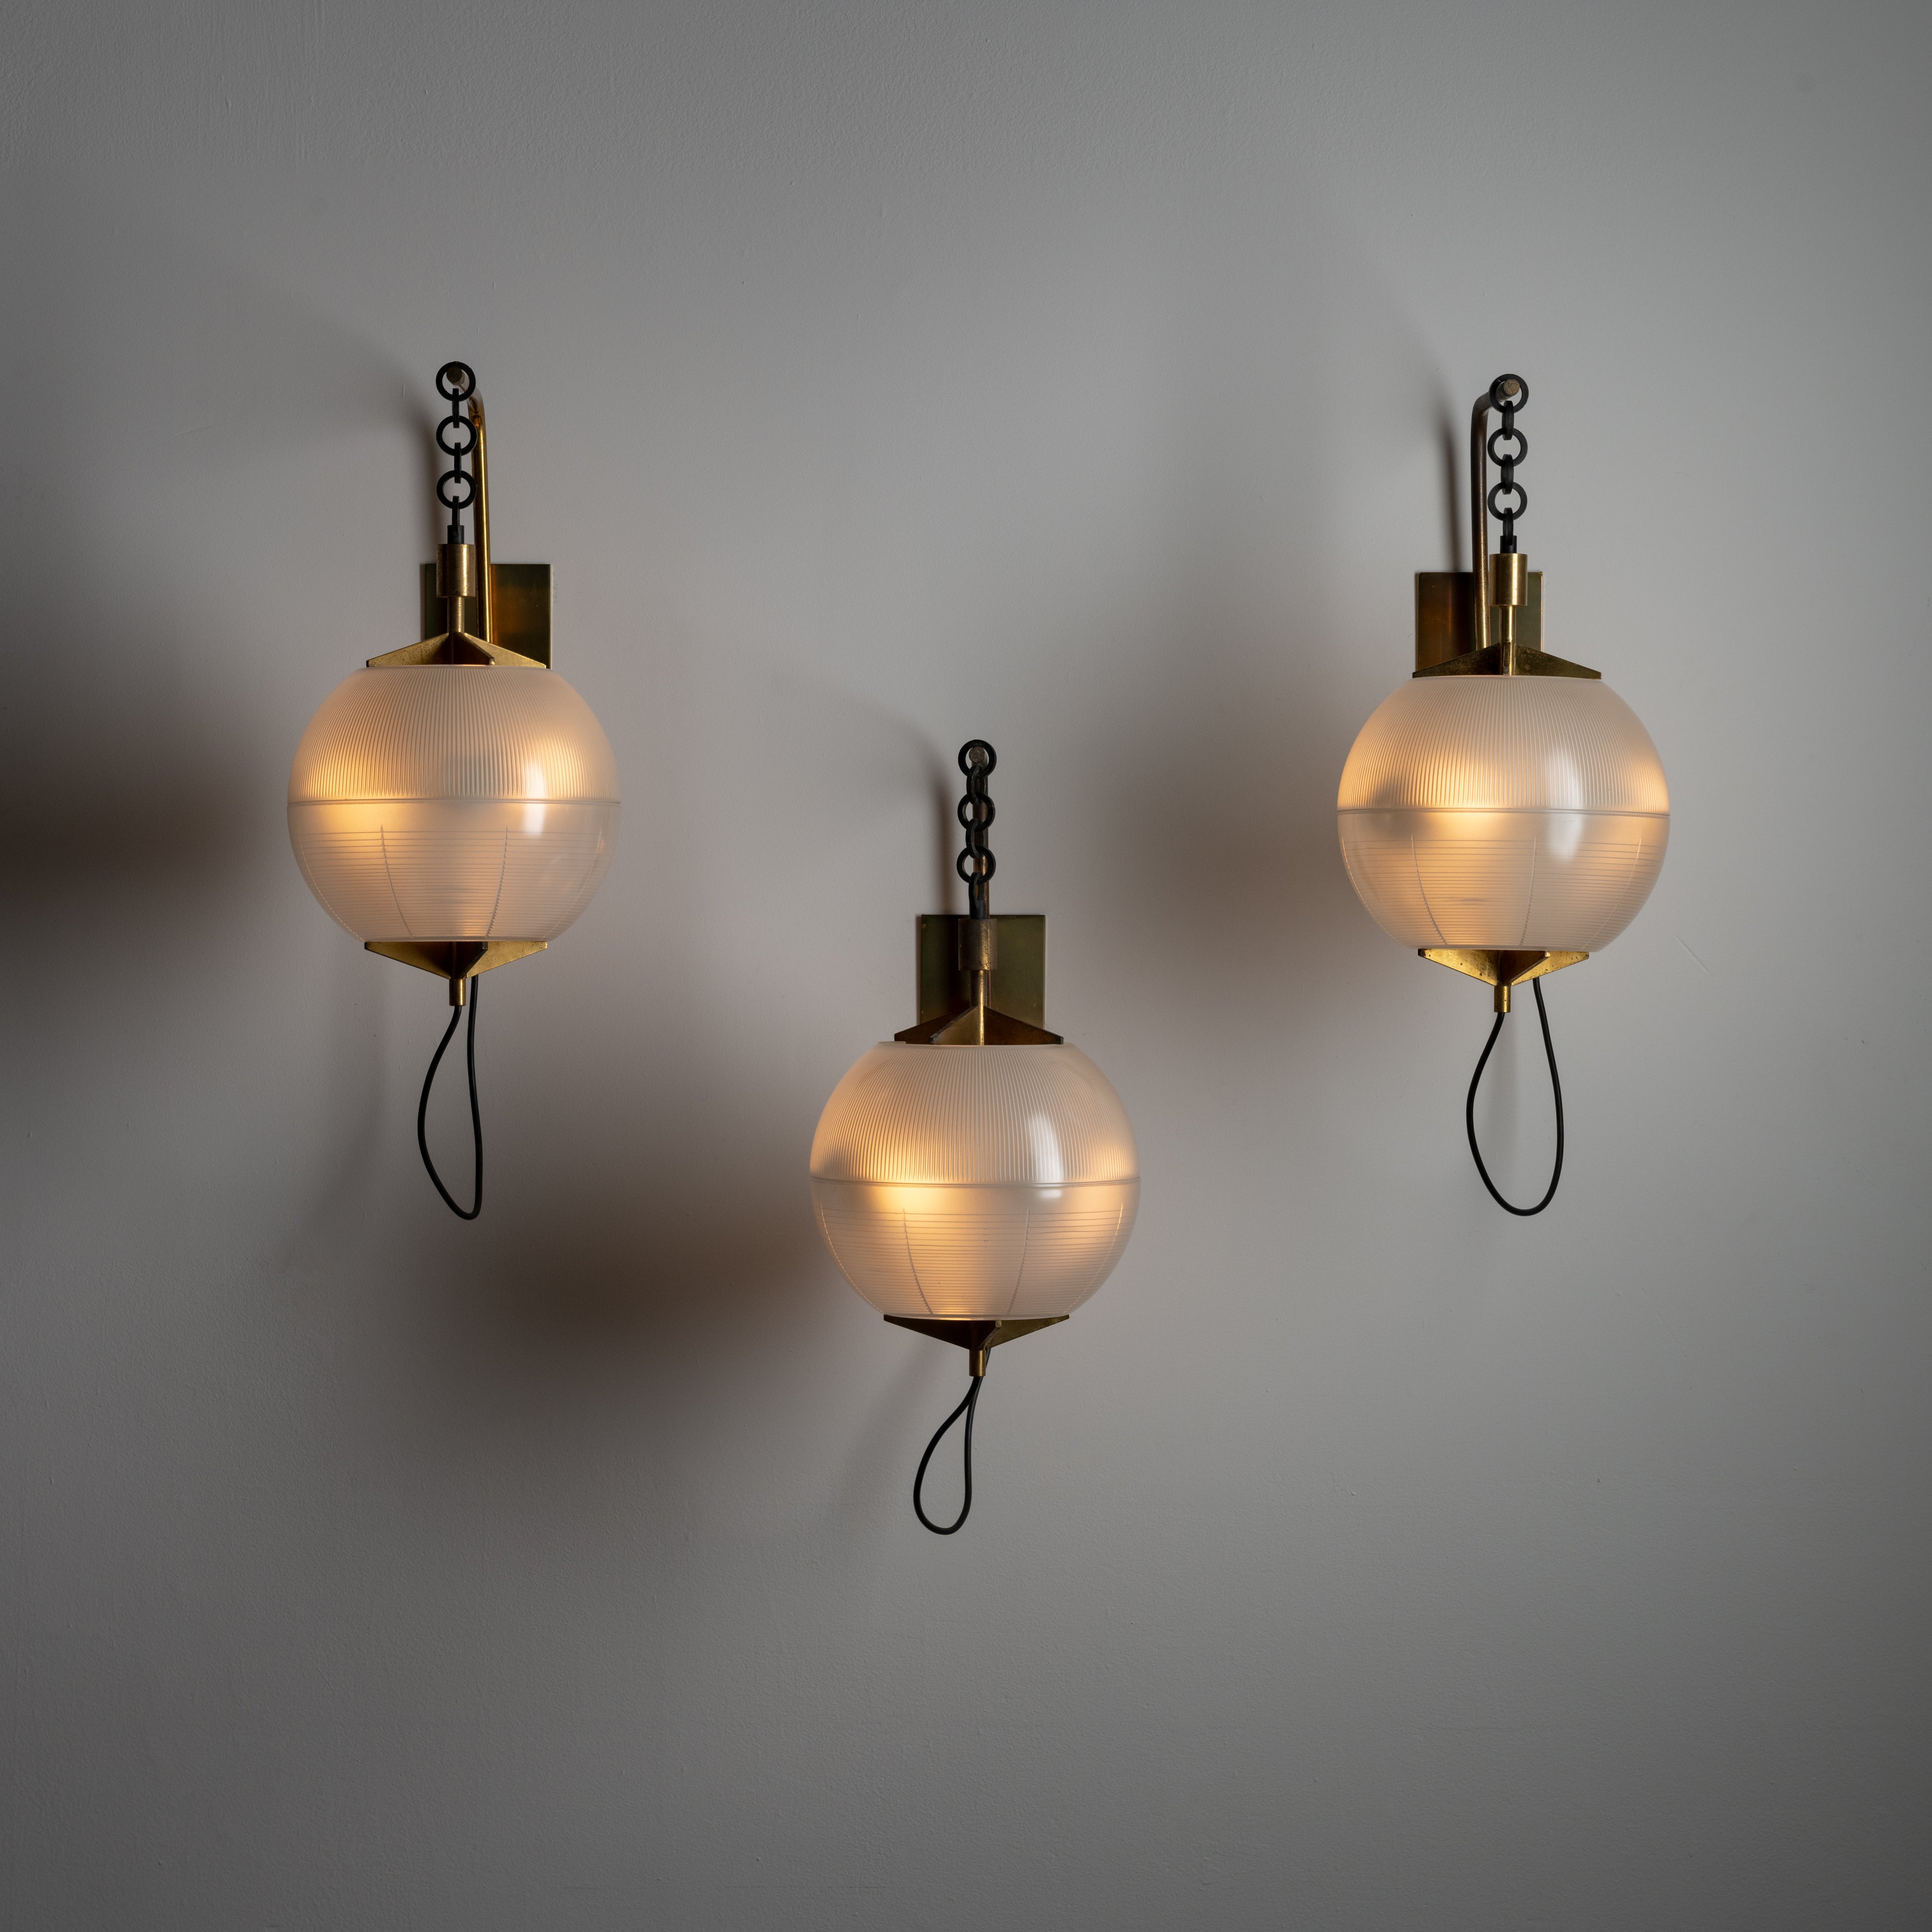 Wall Sconces by Greco. Designed and manufactured in Italy, circa 1950. Architectural sconces by greco, with suspended reeded glass sphere shades. The sconces feature steel chain links as the method of suspension, providing a nice contrast between